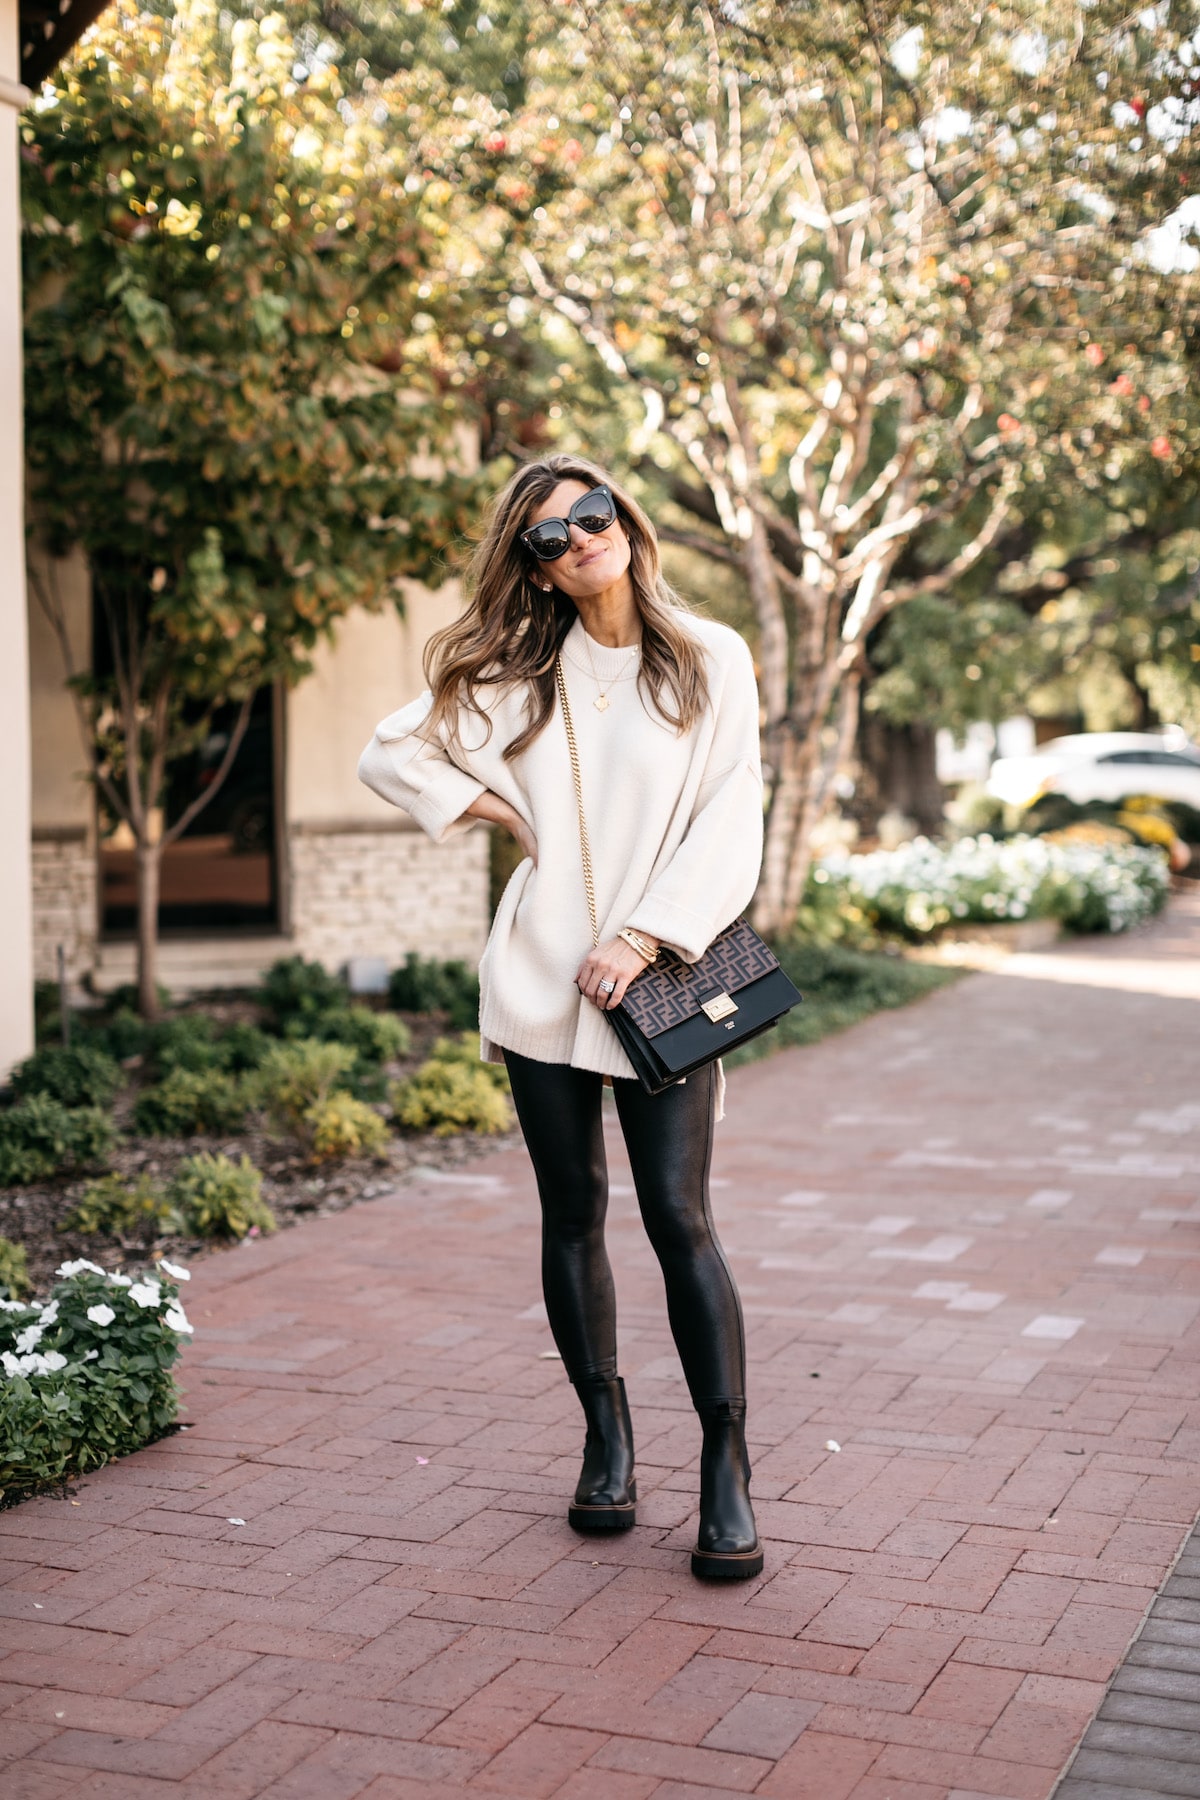 7 fall wardrobe essentials you should get during the Nordstrom